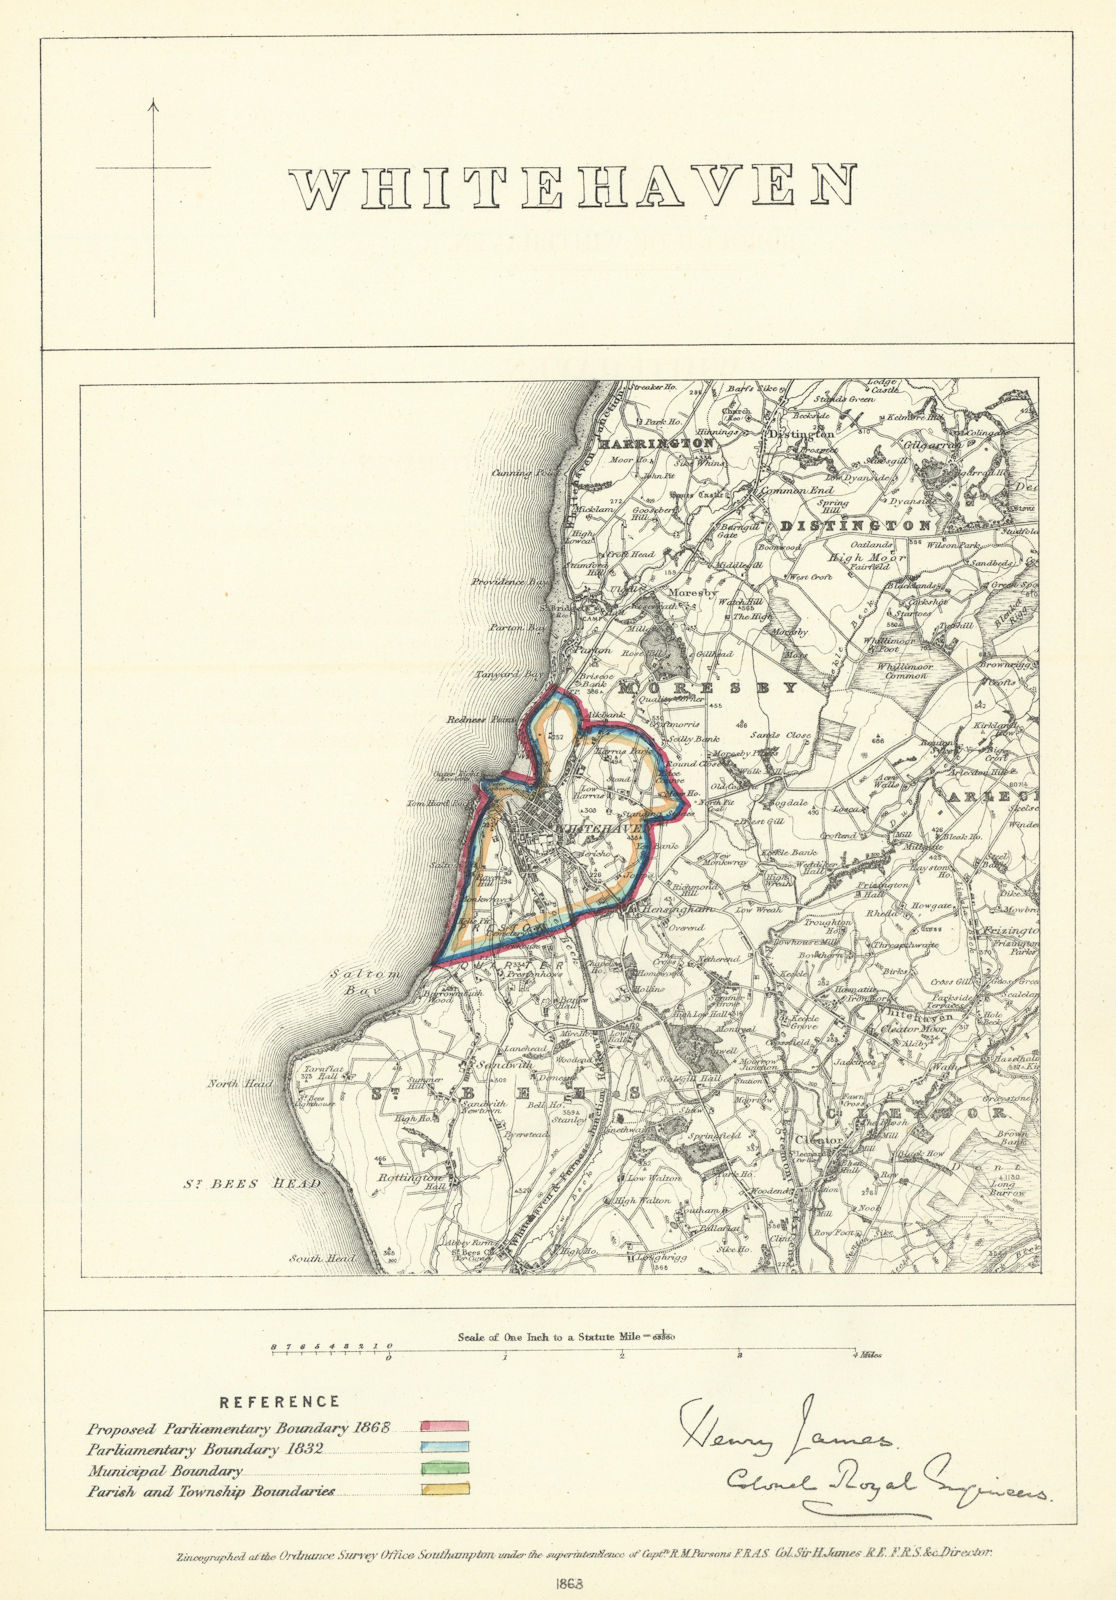 Associate Product Whitehaven, Cumbria. JAMES. Parliamentary Boundary Commission 1868 old map